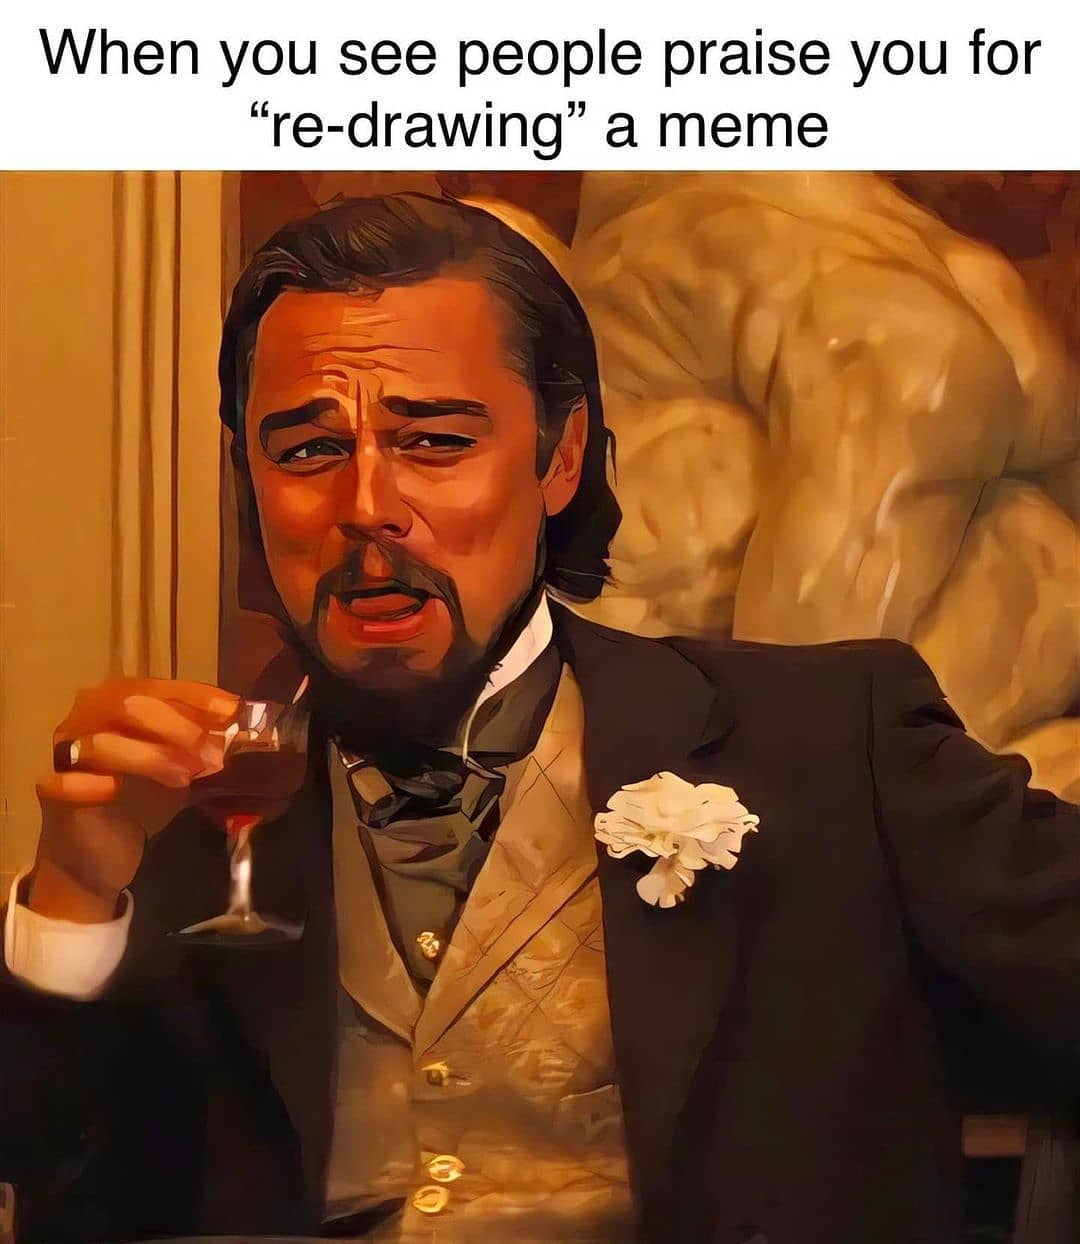 When you see people praise you for "re-drawing" a meme.